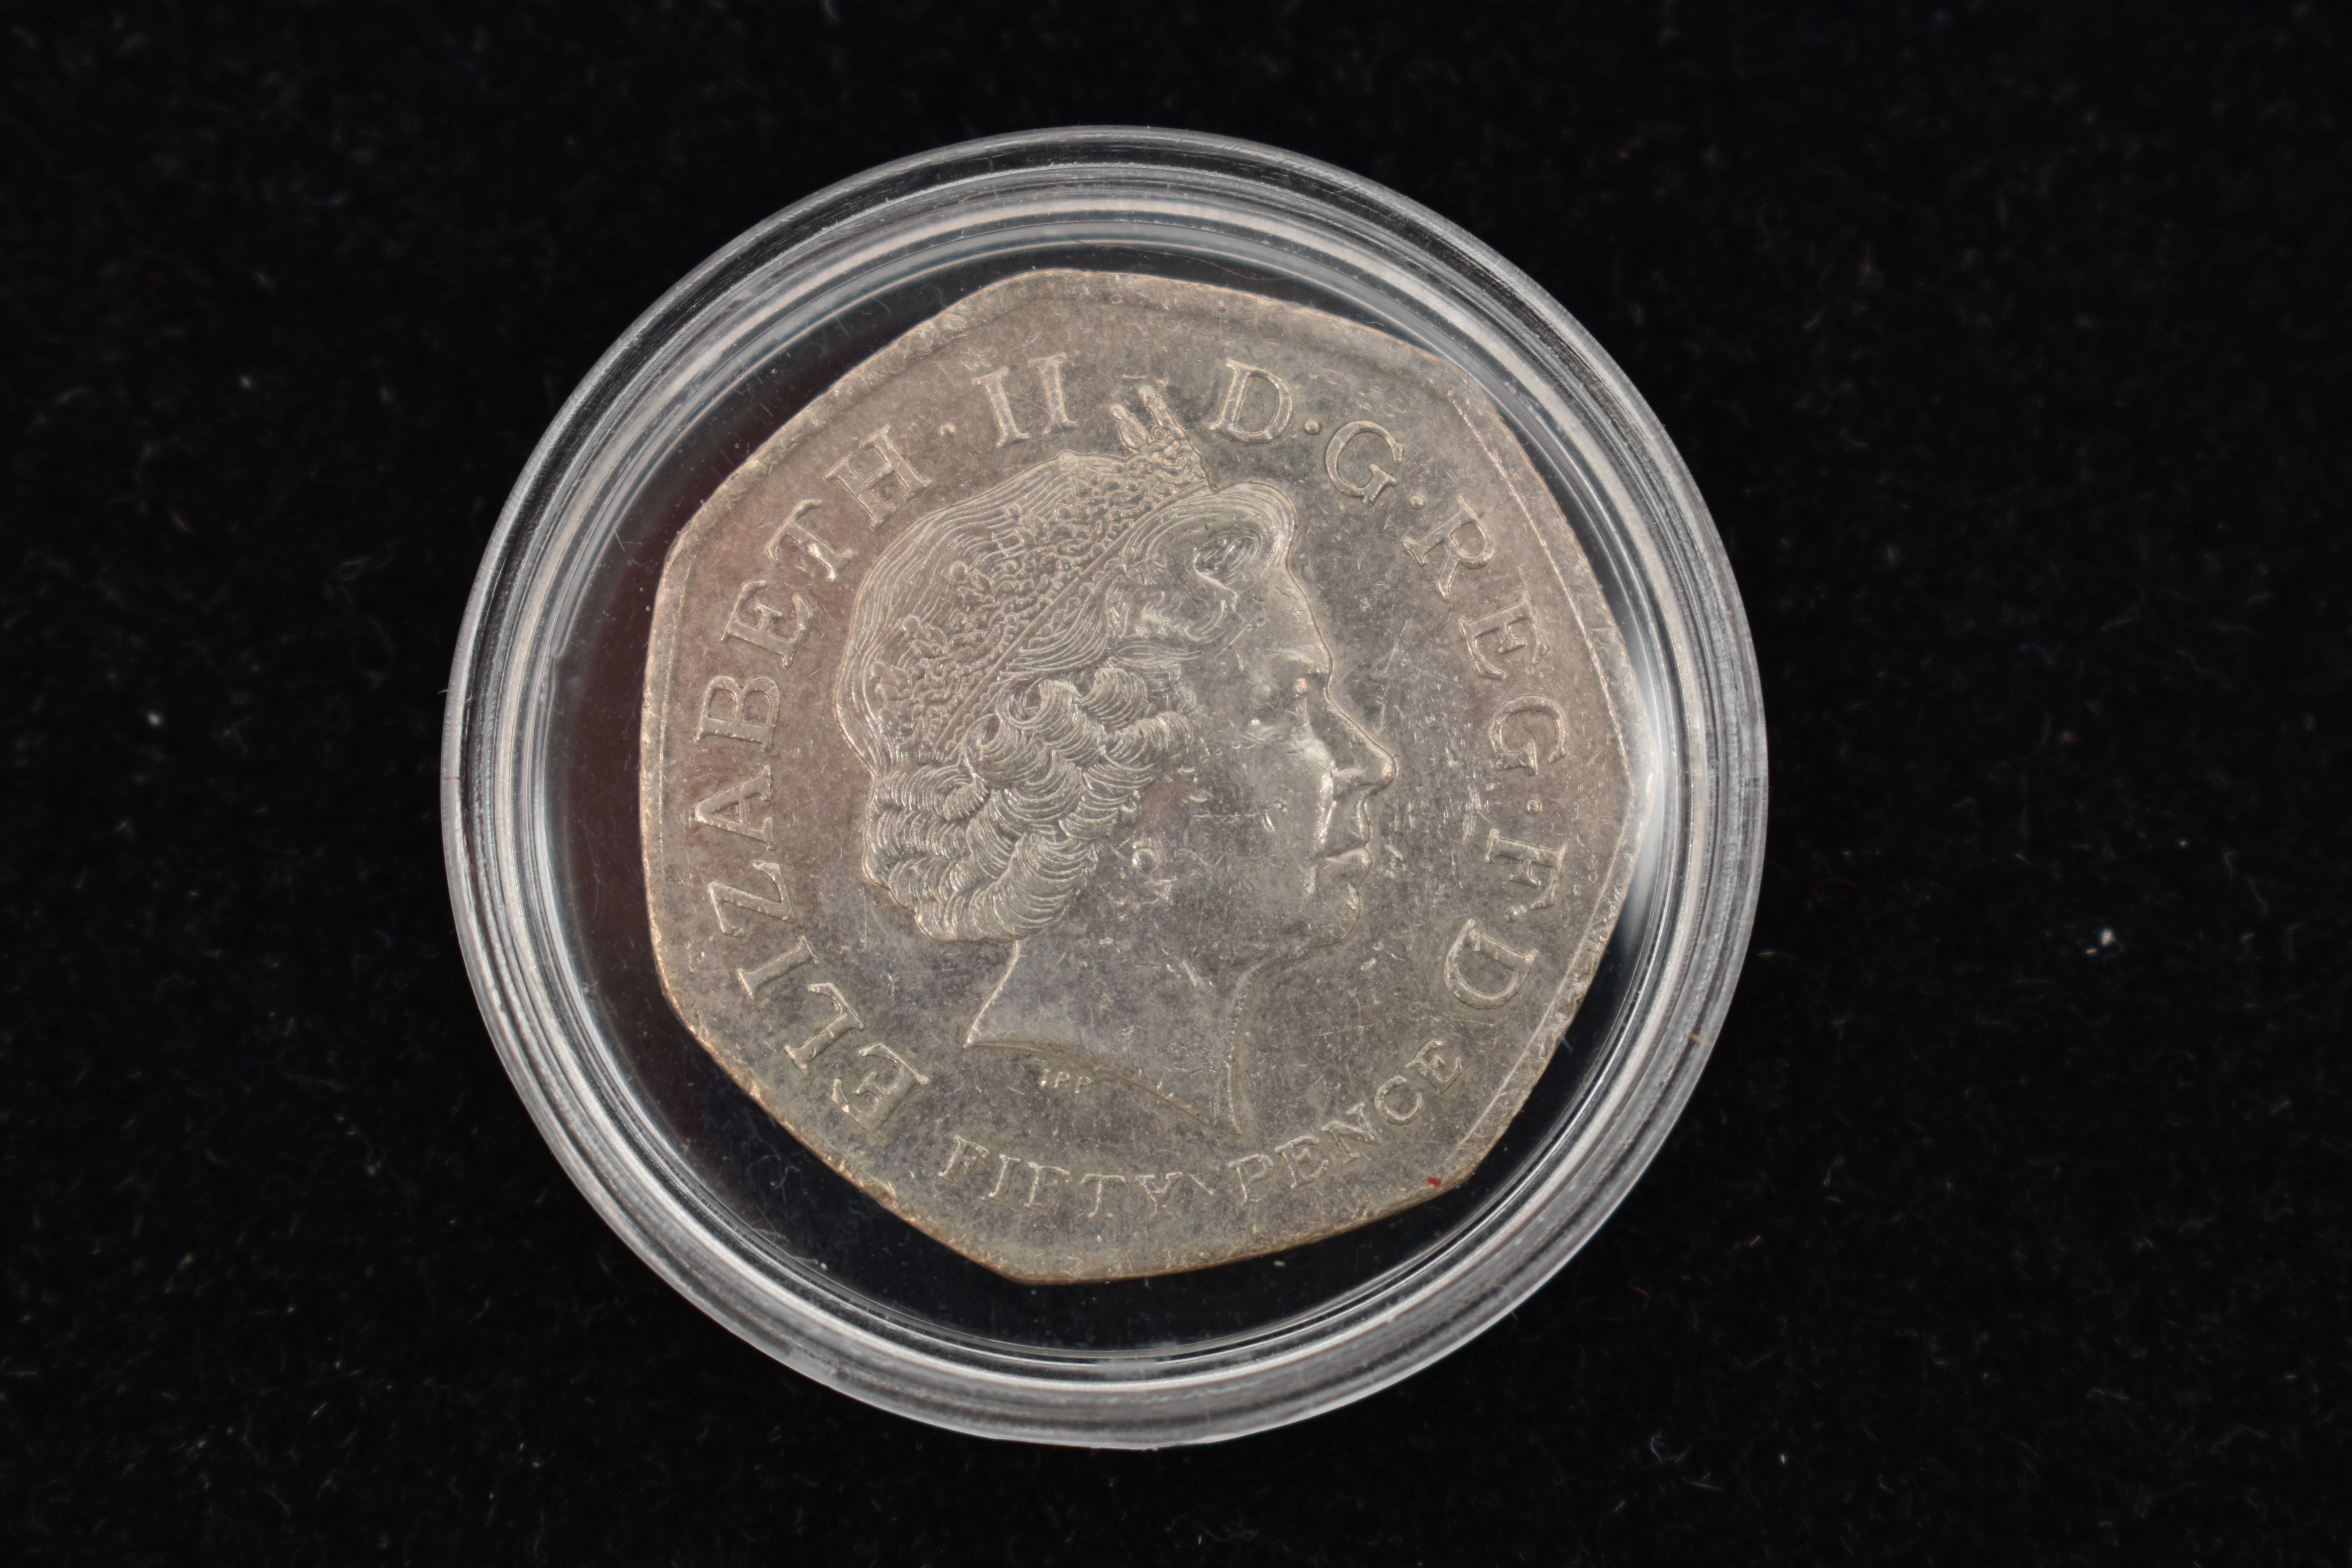 A ROYAL MINT KEW GARDENS FIFTY PENCE COIN 2009,In Good Condition Taken out of Circulation - Image 2 of 2